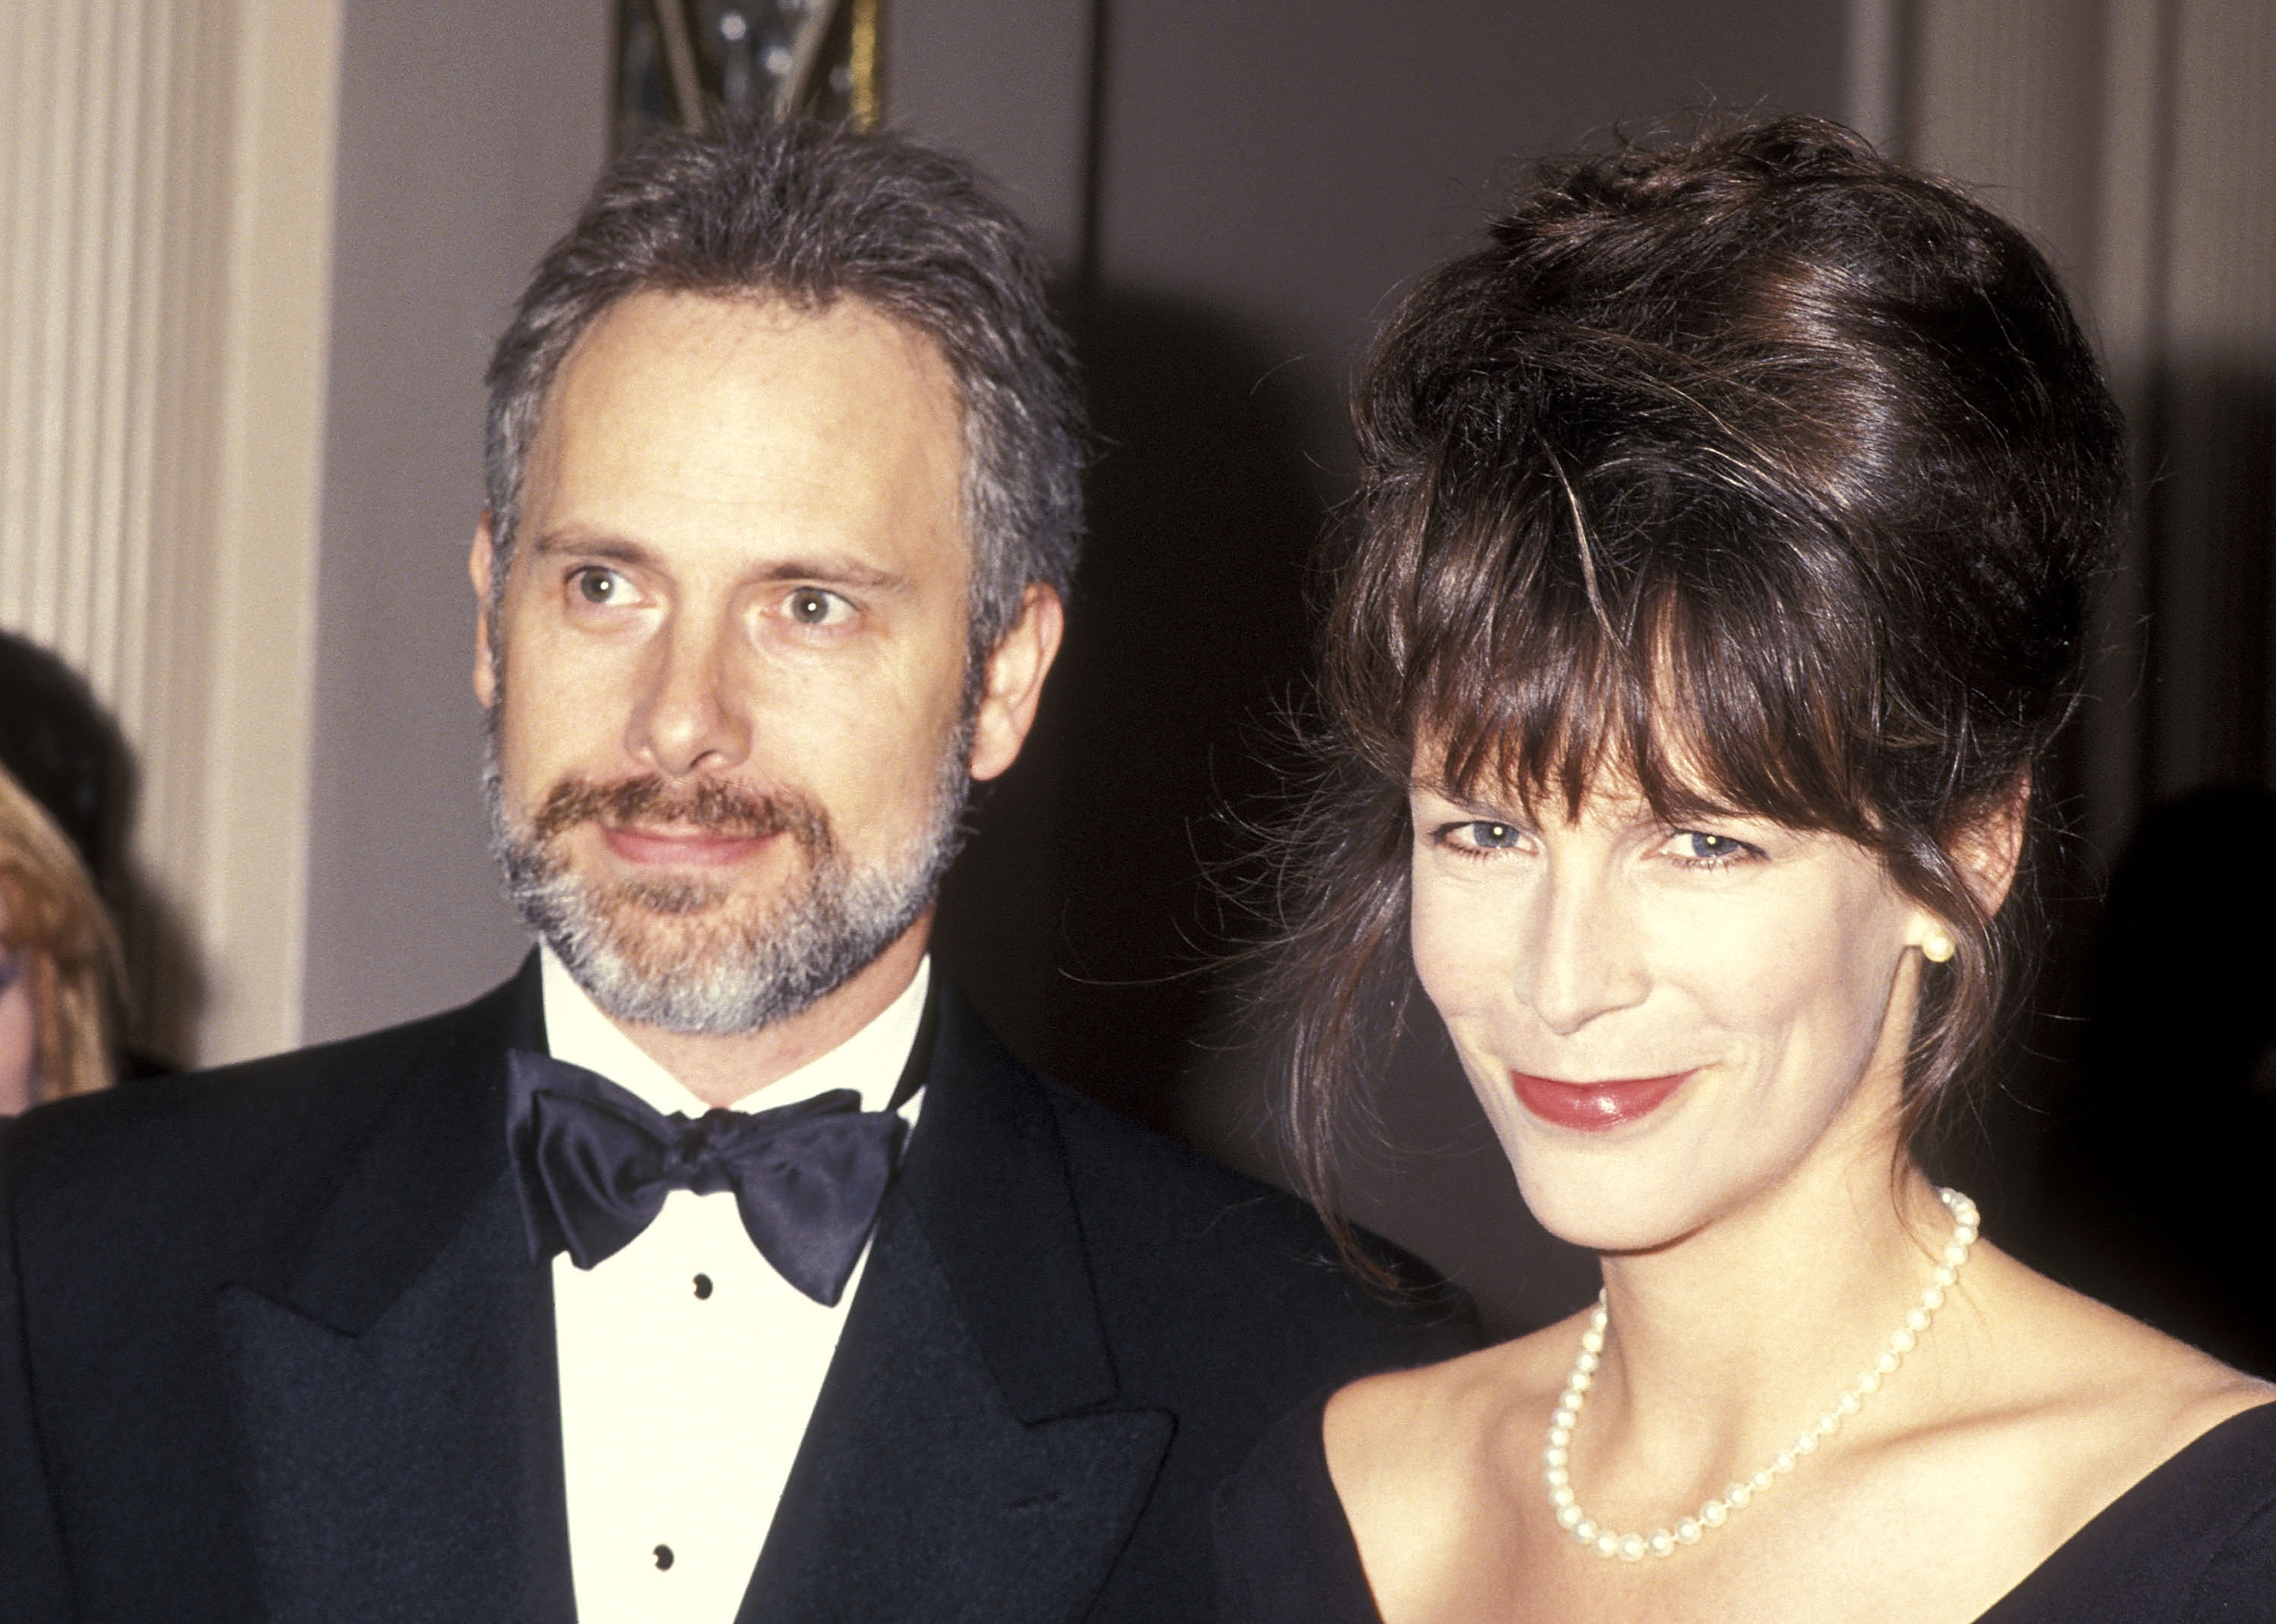 Christopher Guest and Jamie Lee Curtis attend People for the American Way's Sixth Annual "Spirit of Liberty" Award Dinner at the Waldorf-Astoria Hotel in New York City on November 18, 1990. | Source: Getty Images